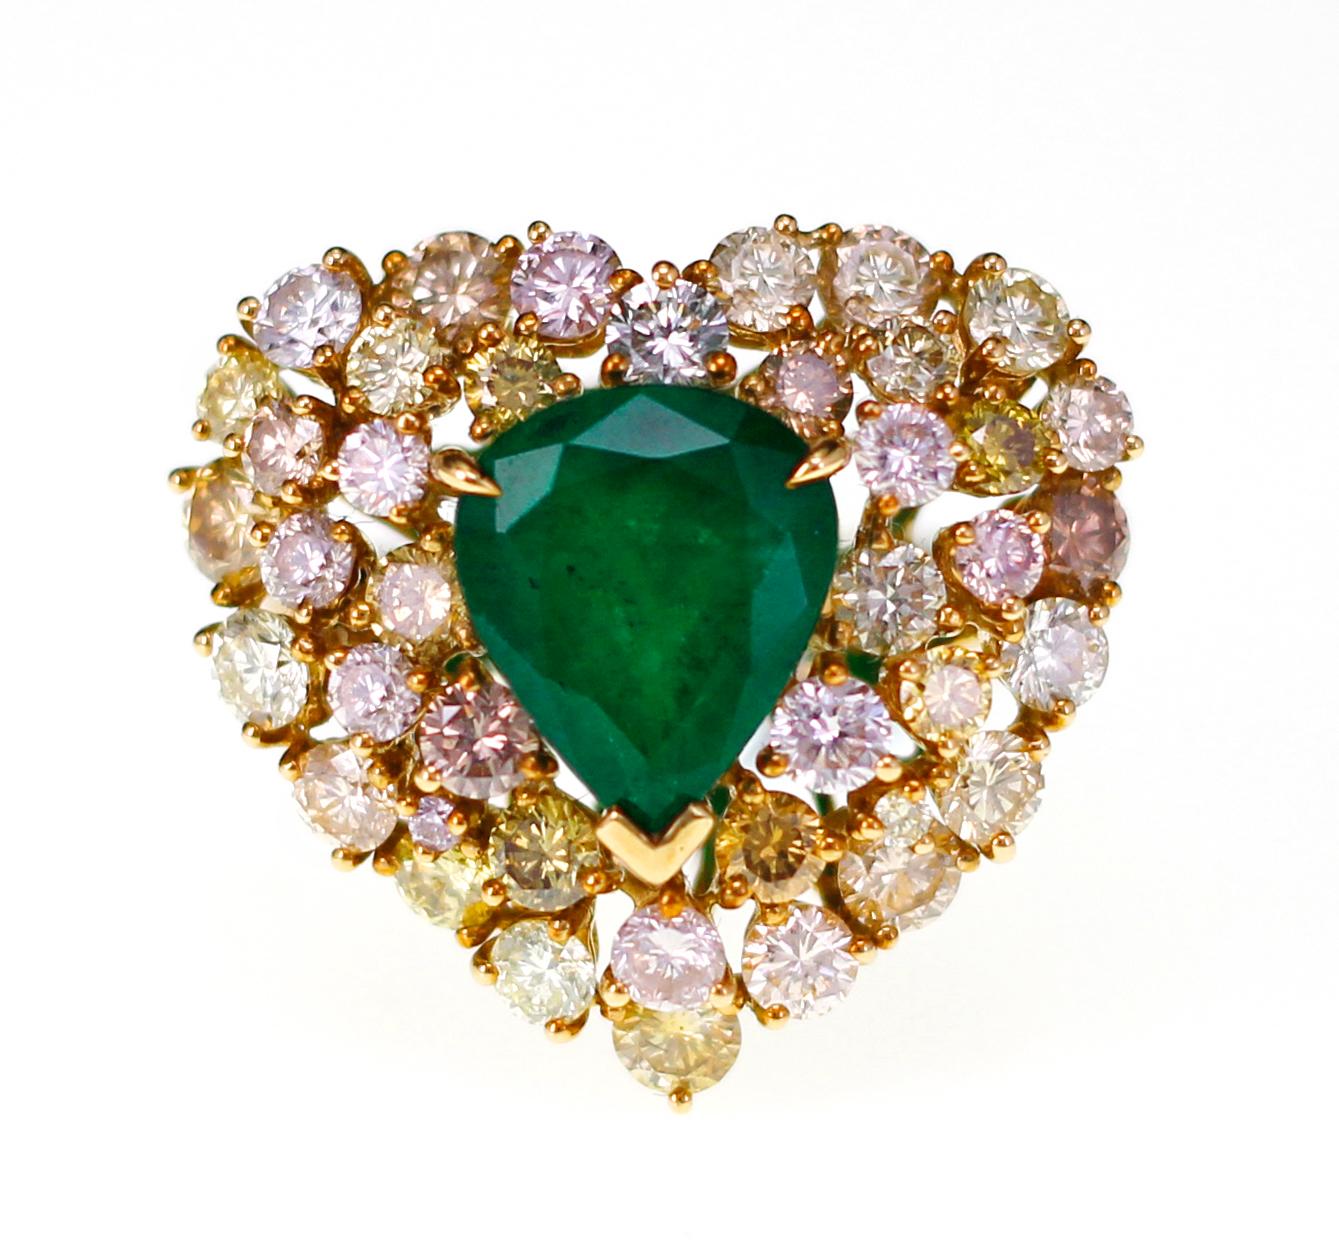 2.8 carat of Vivid Green Emerald with 2.77 carat of natural fancy pink and fancy yellow diamond ring. 